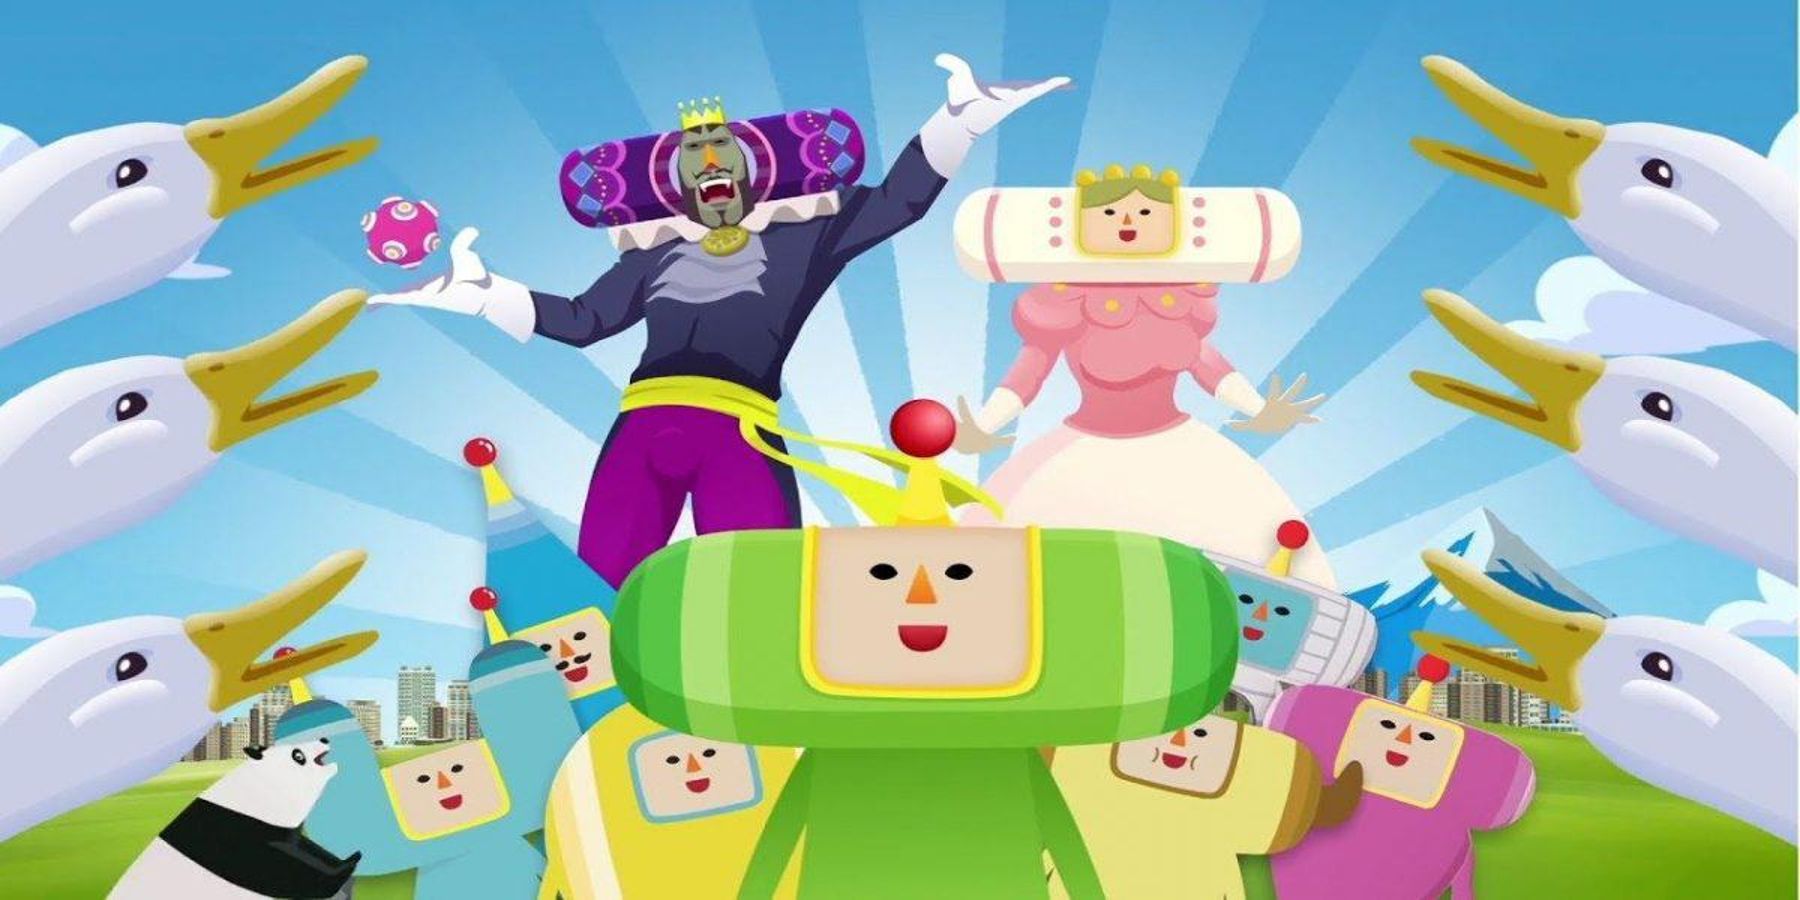 Katamari Damacy Remakes Strongly Suggest a New Game on the Horizon